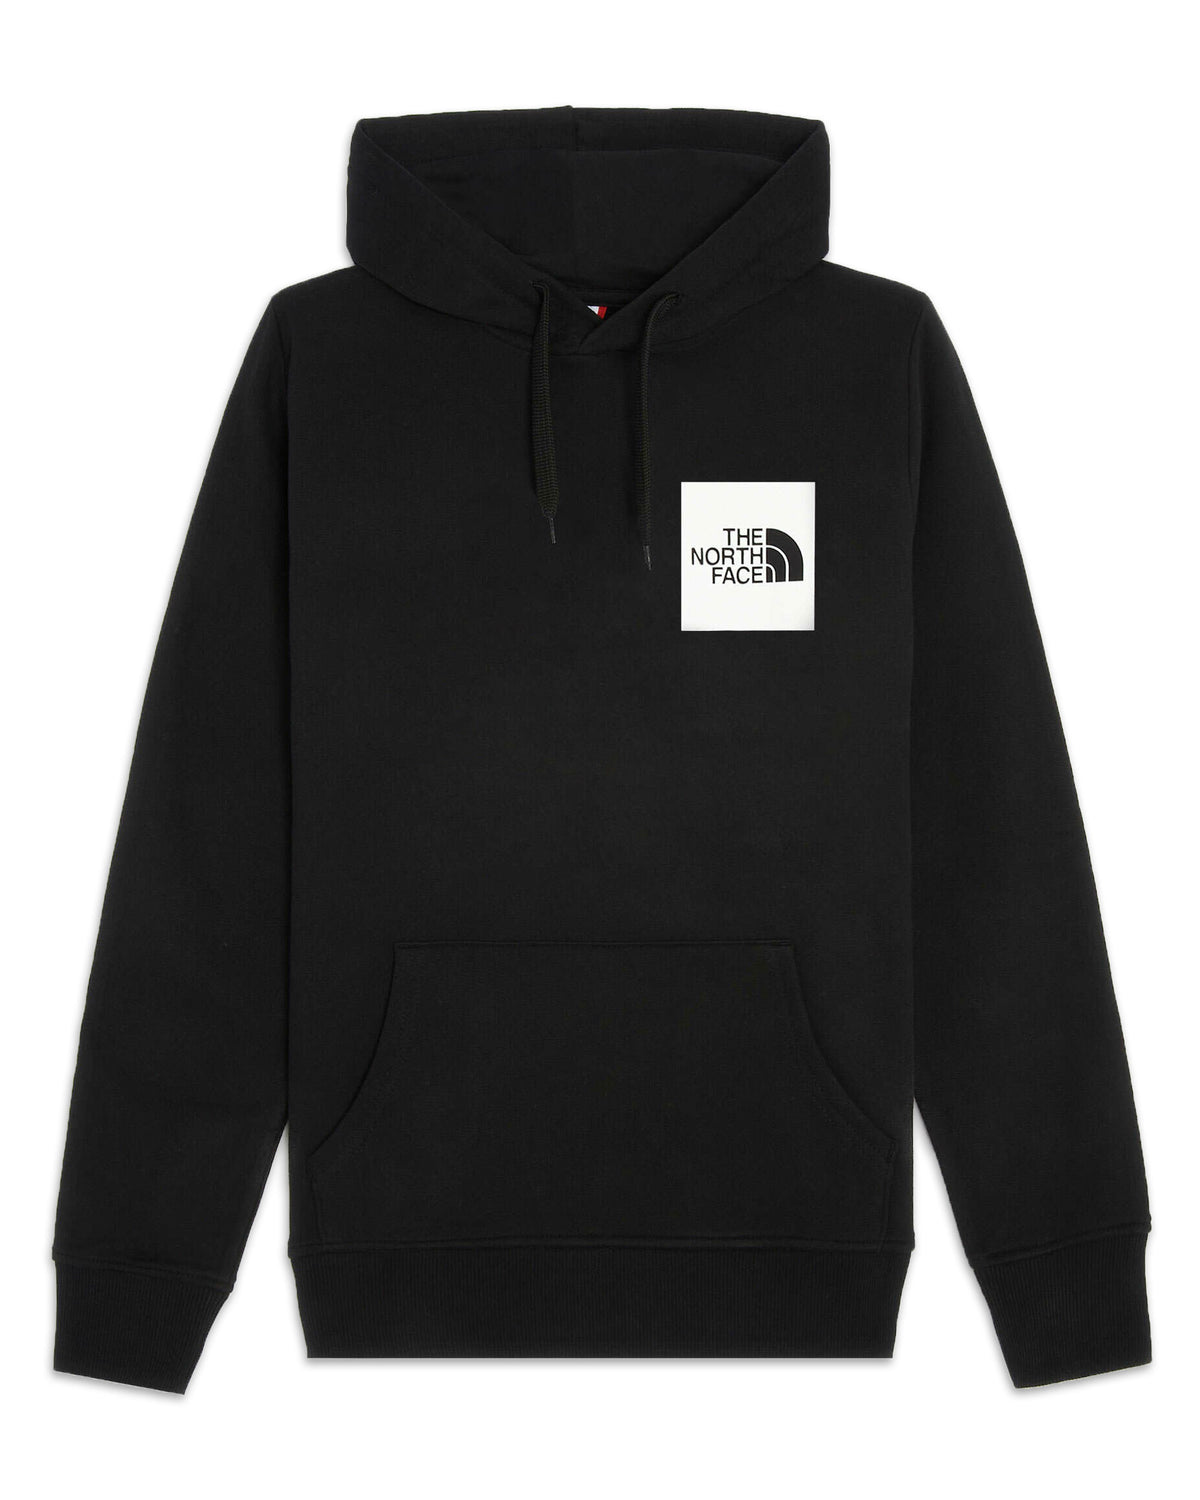 The North Face Fine Hoodie Black